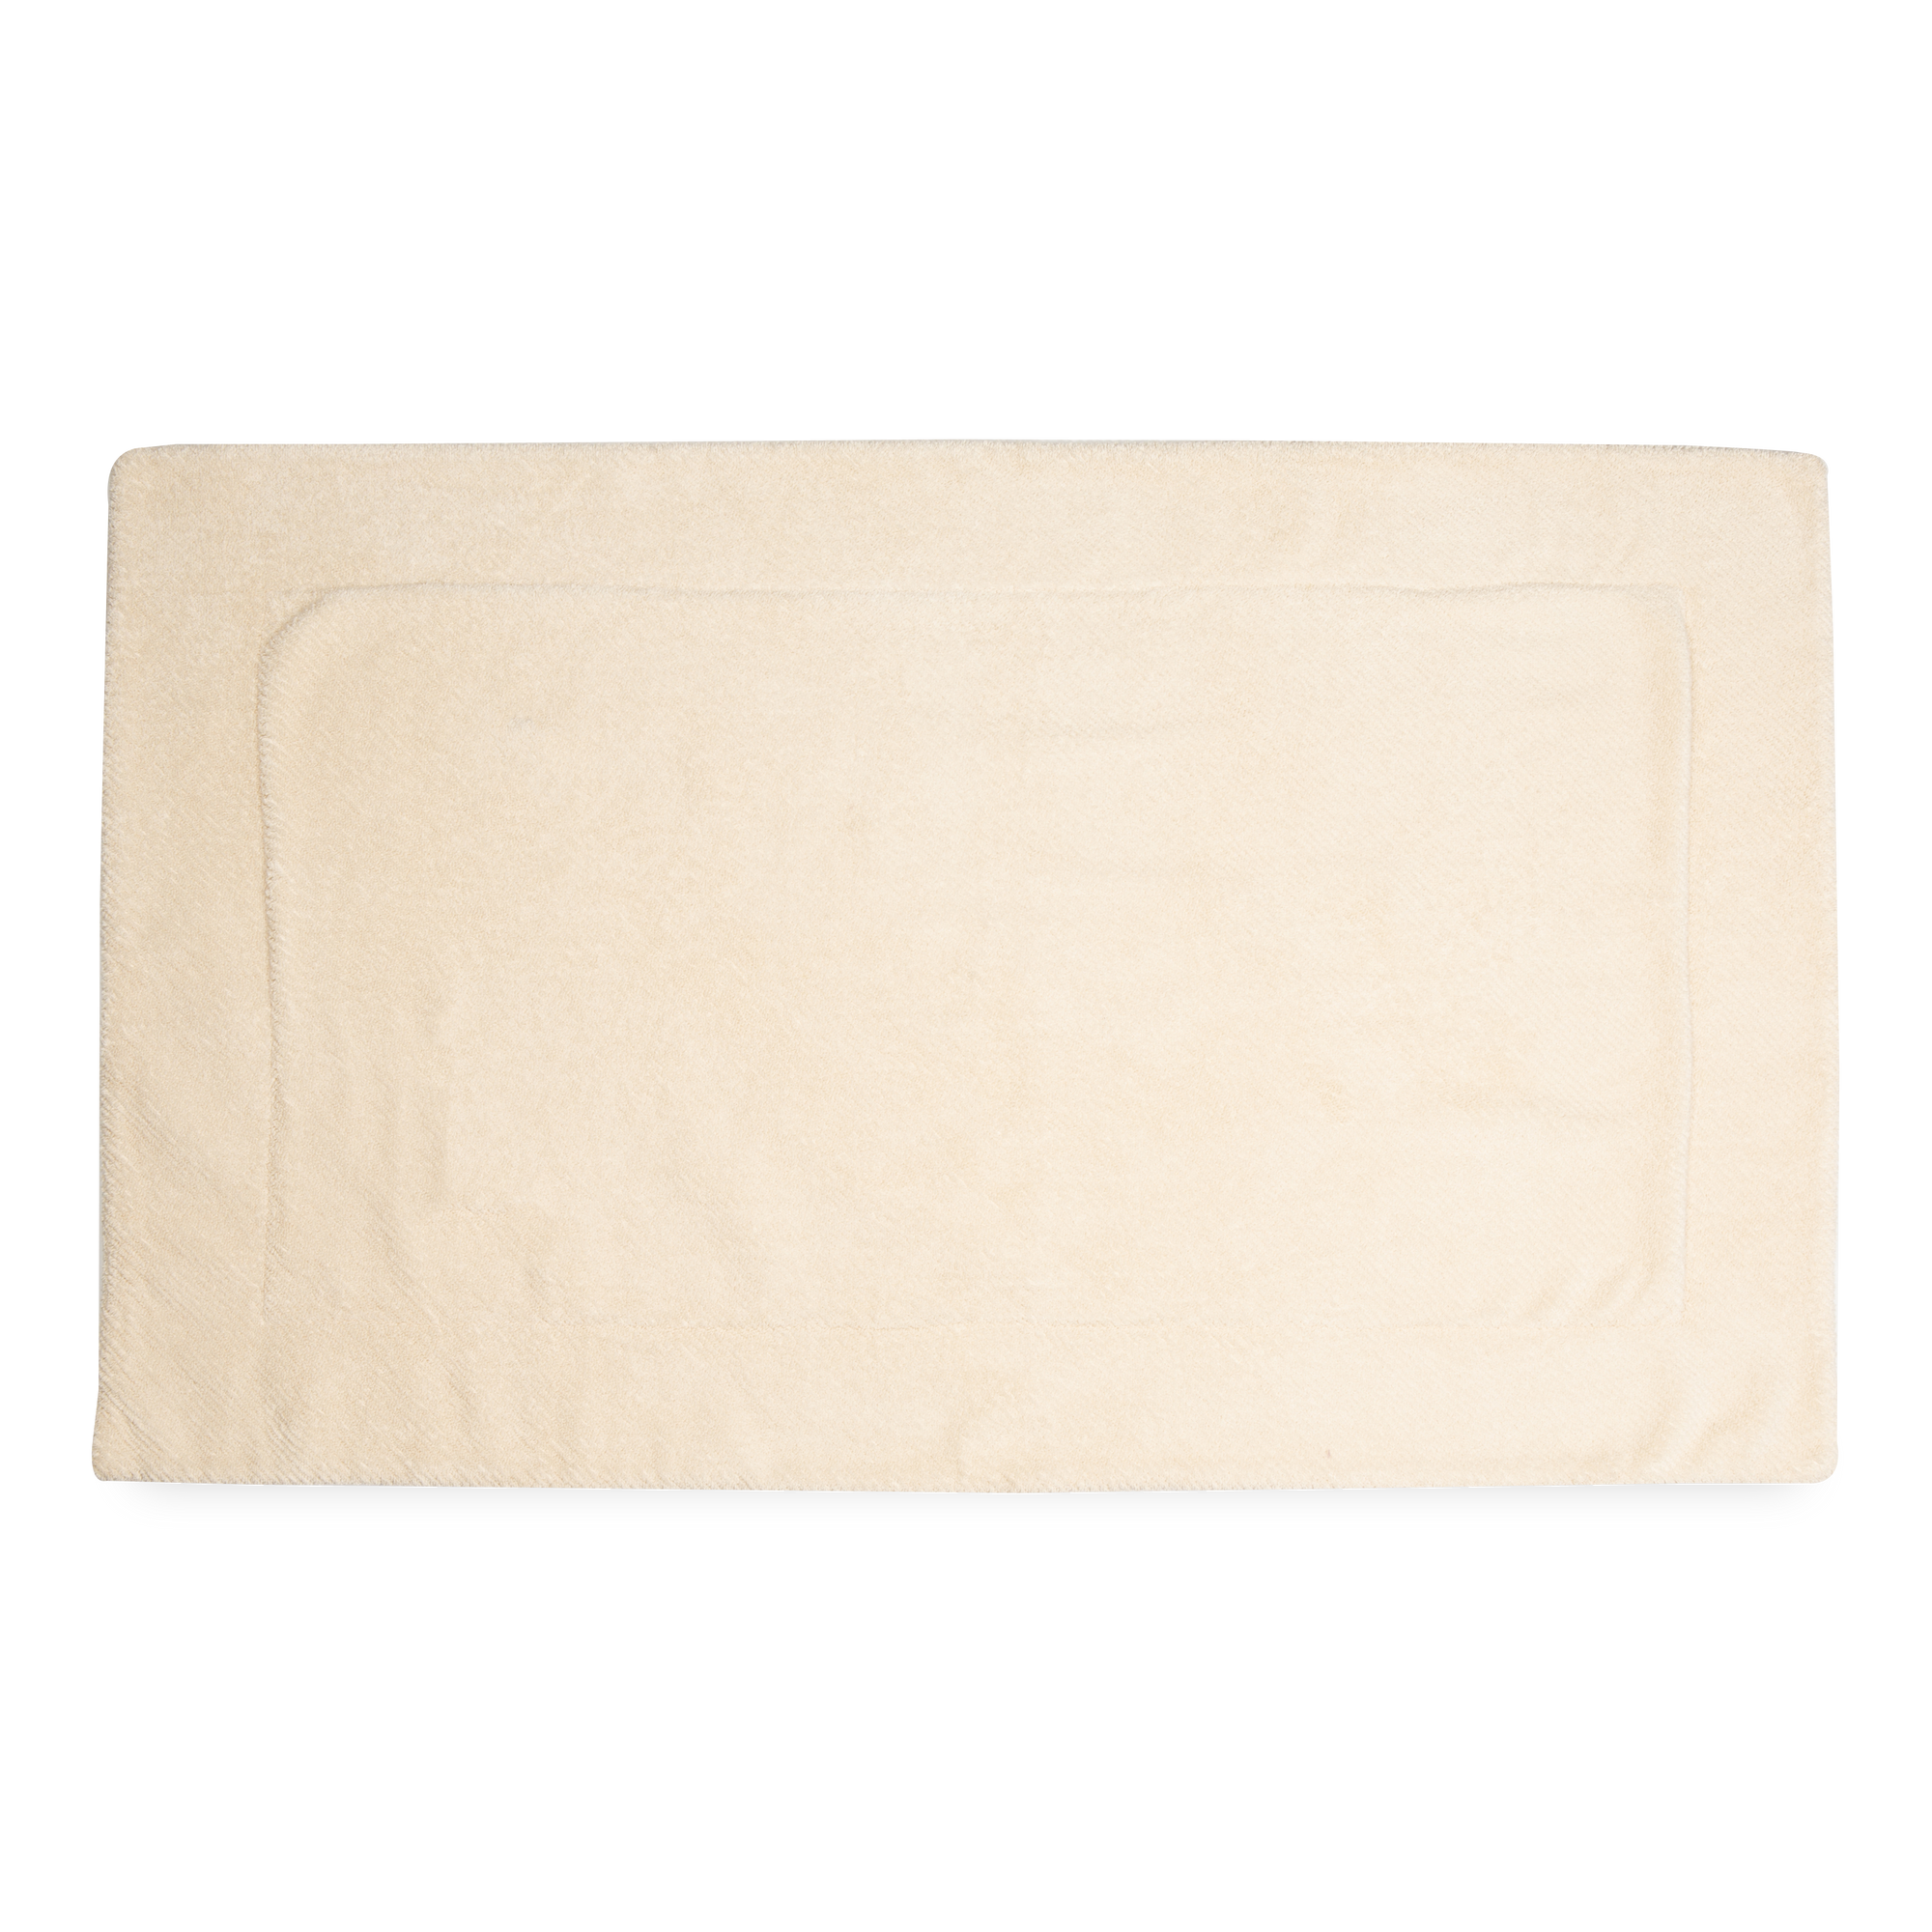 Available in a wide array of beautiful colours, the Twill bath Mat is a great everyday Bath Mat.